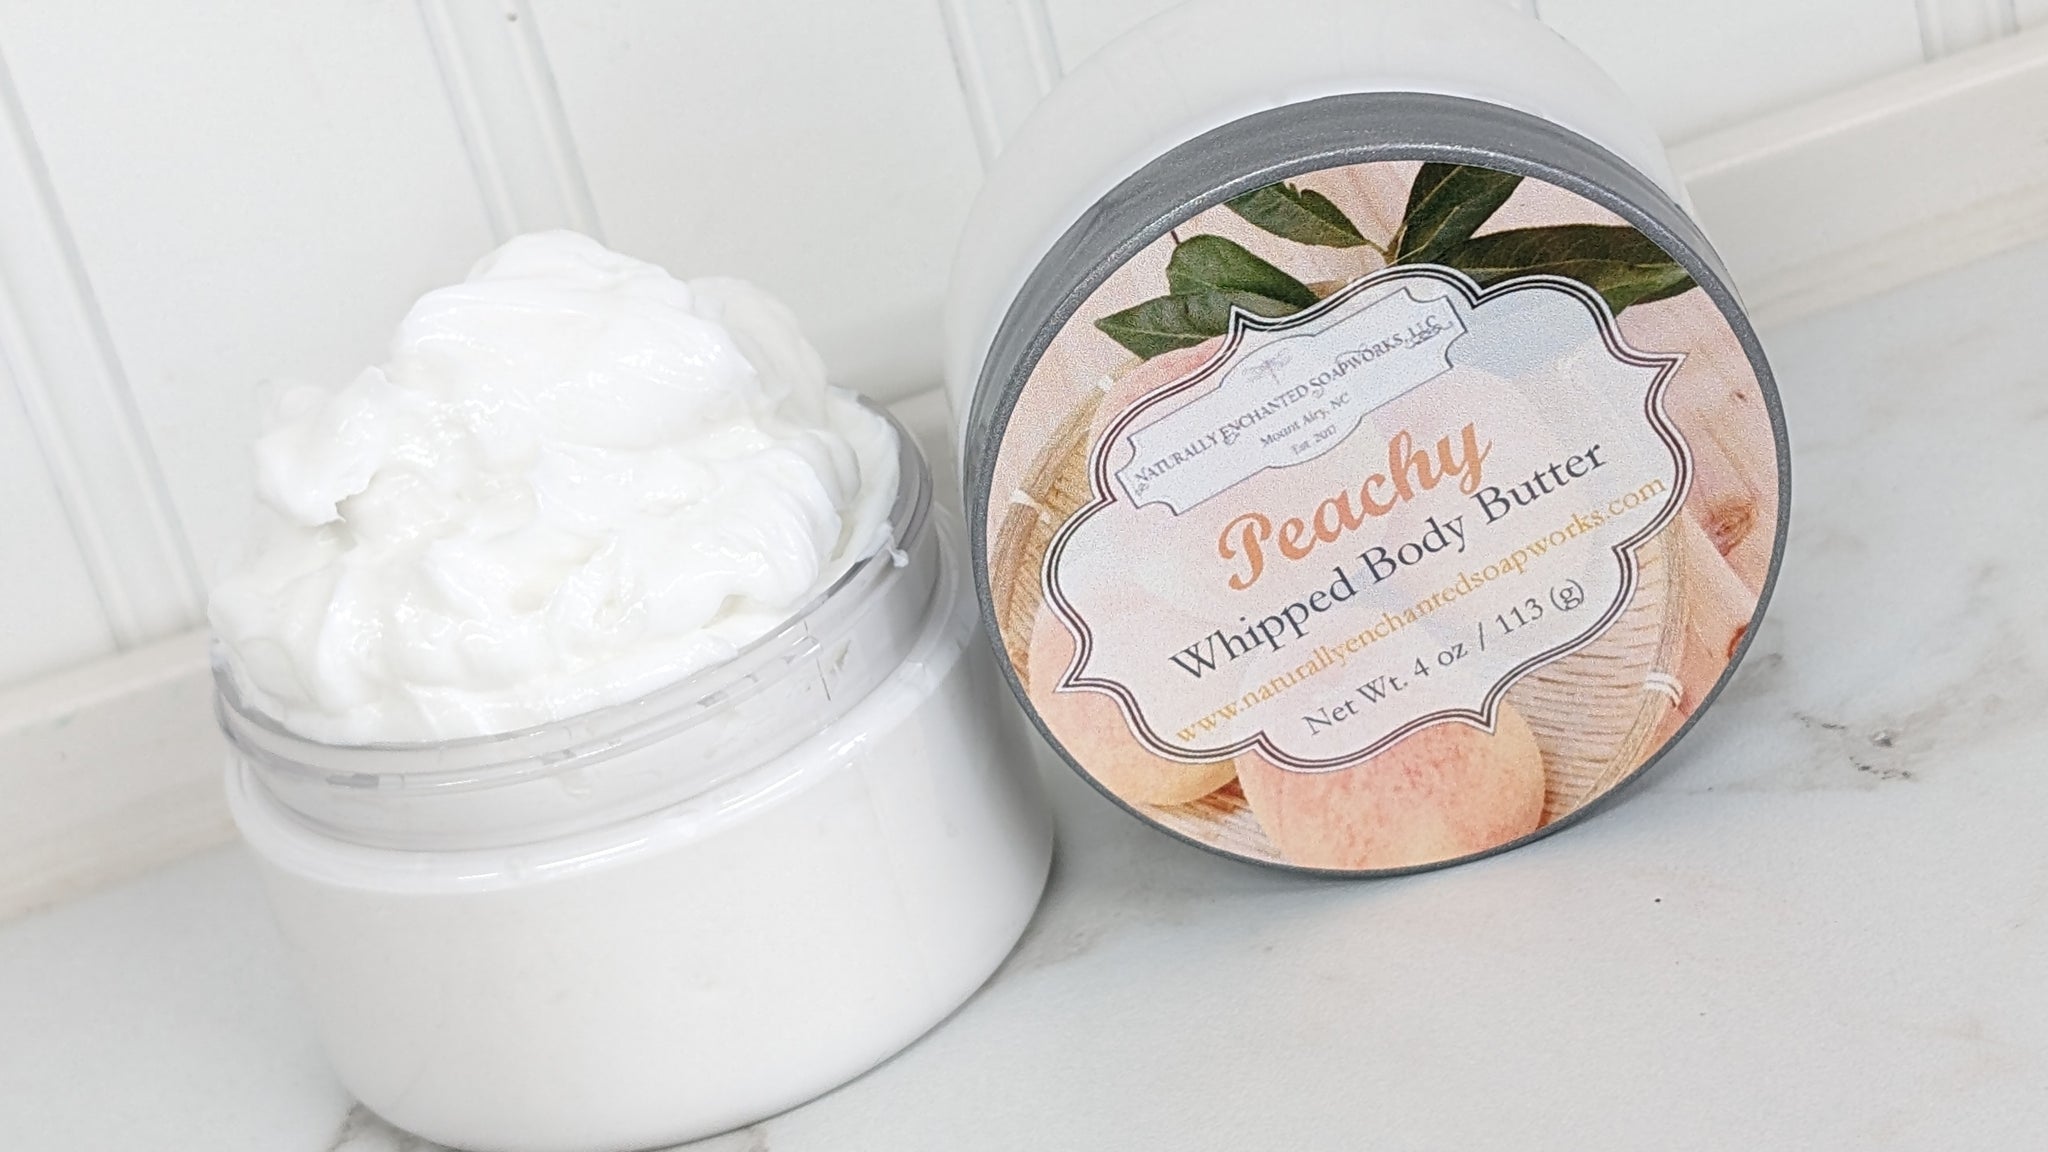 Better Shea Butter Whipped Body Butter Lavender Neroli - Body Moisturizer with Raw Shea Butter for Dry & Delicate Skin, Paraben